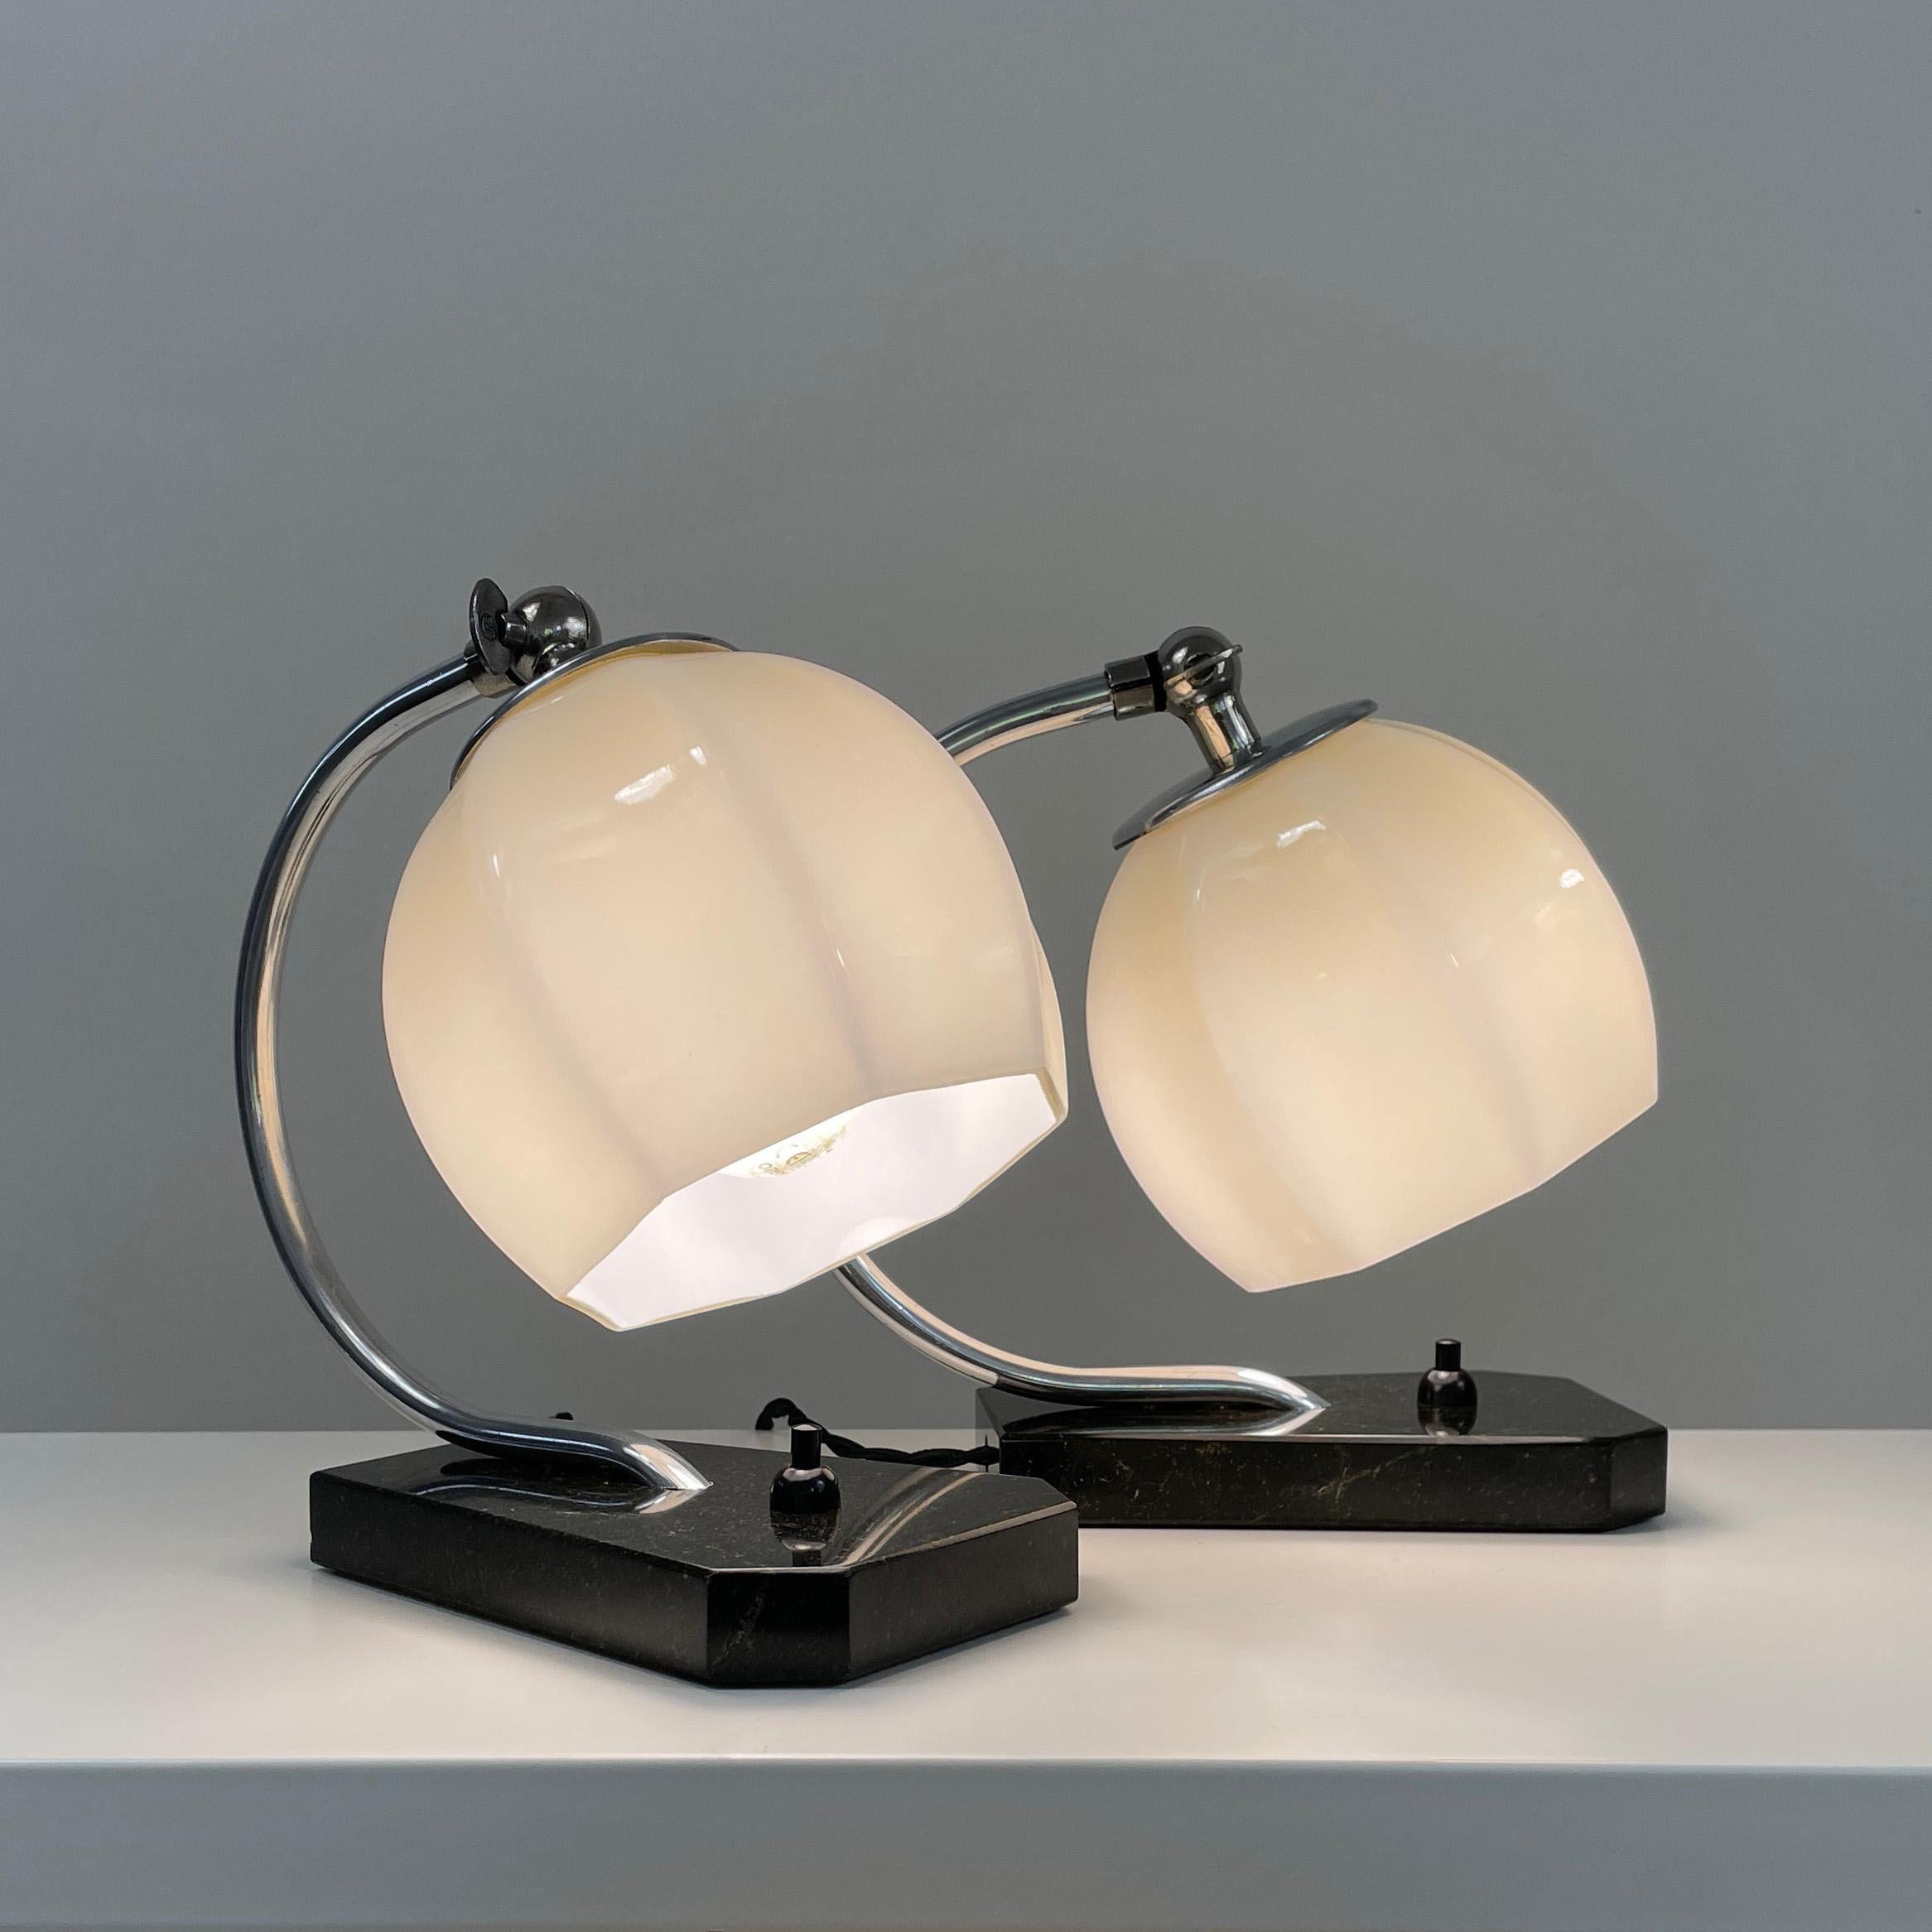 German Art Deco Opaline Glass, Marble and Aluminum Table Lamps, 1930s For Sale 12